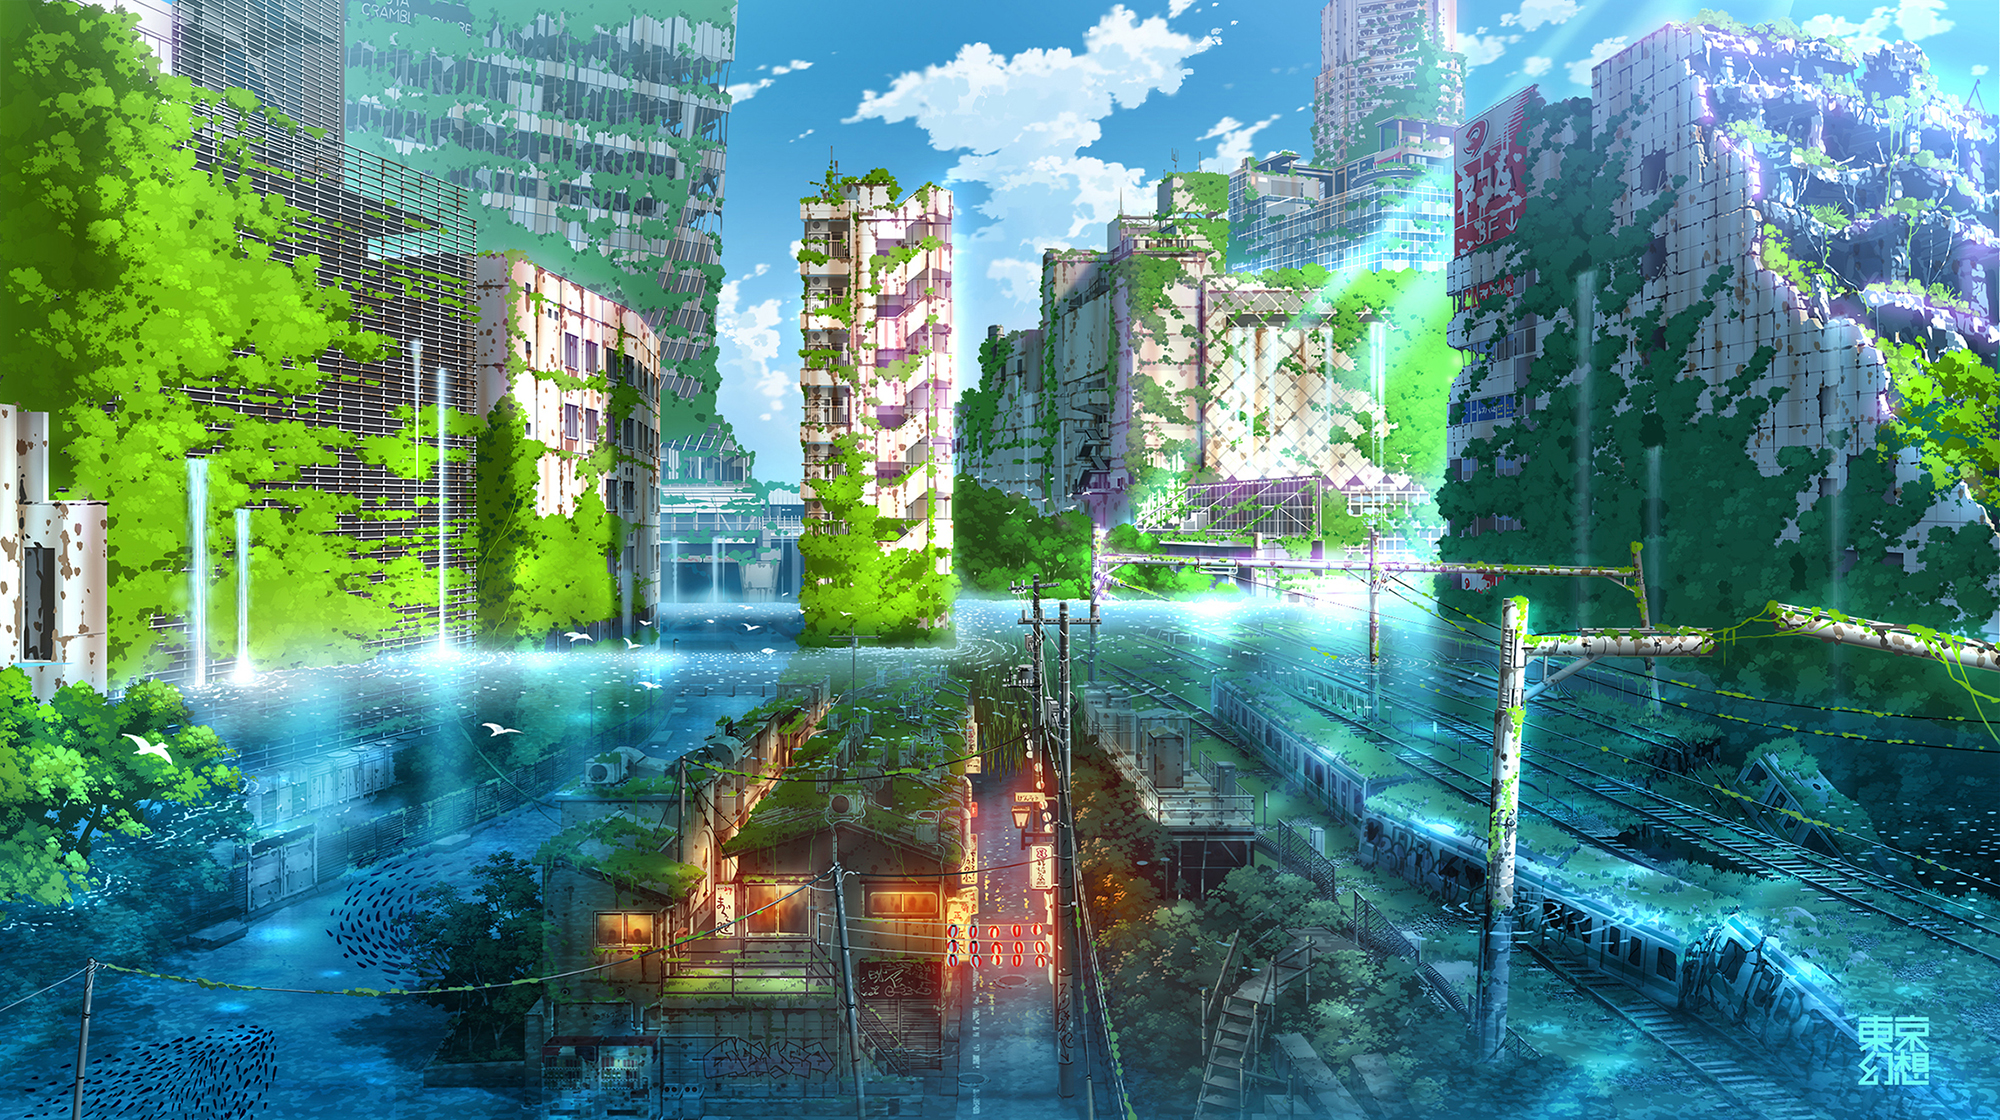 Cityscape Ruins Digital Art City Clouds Water Fish Train Stairs Trees 2000x1120